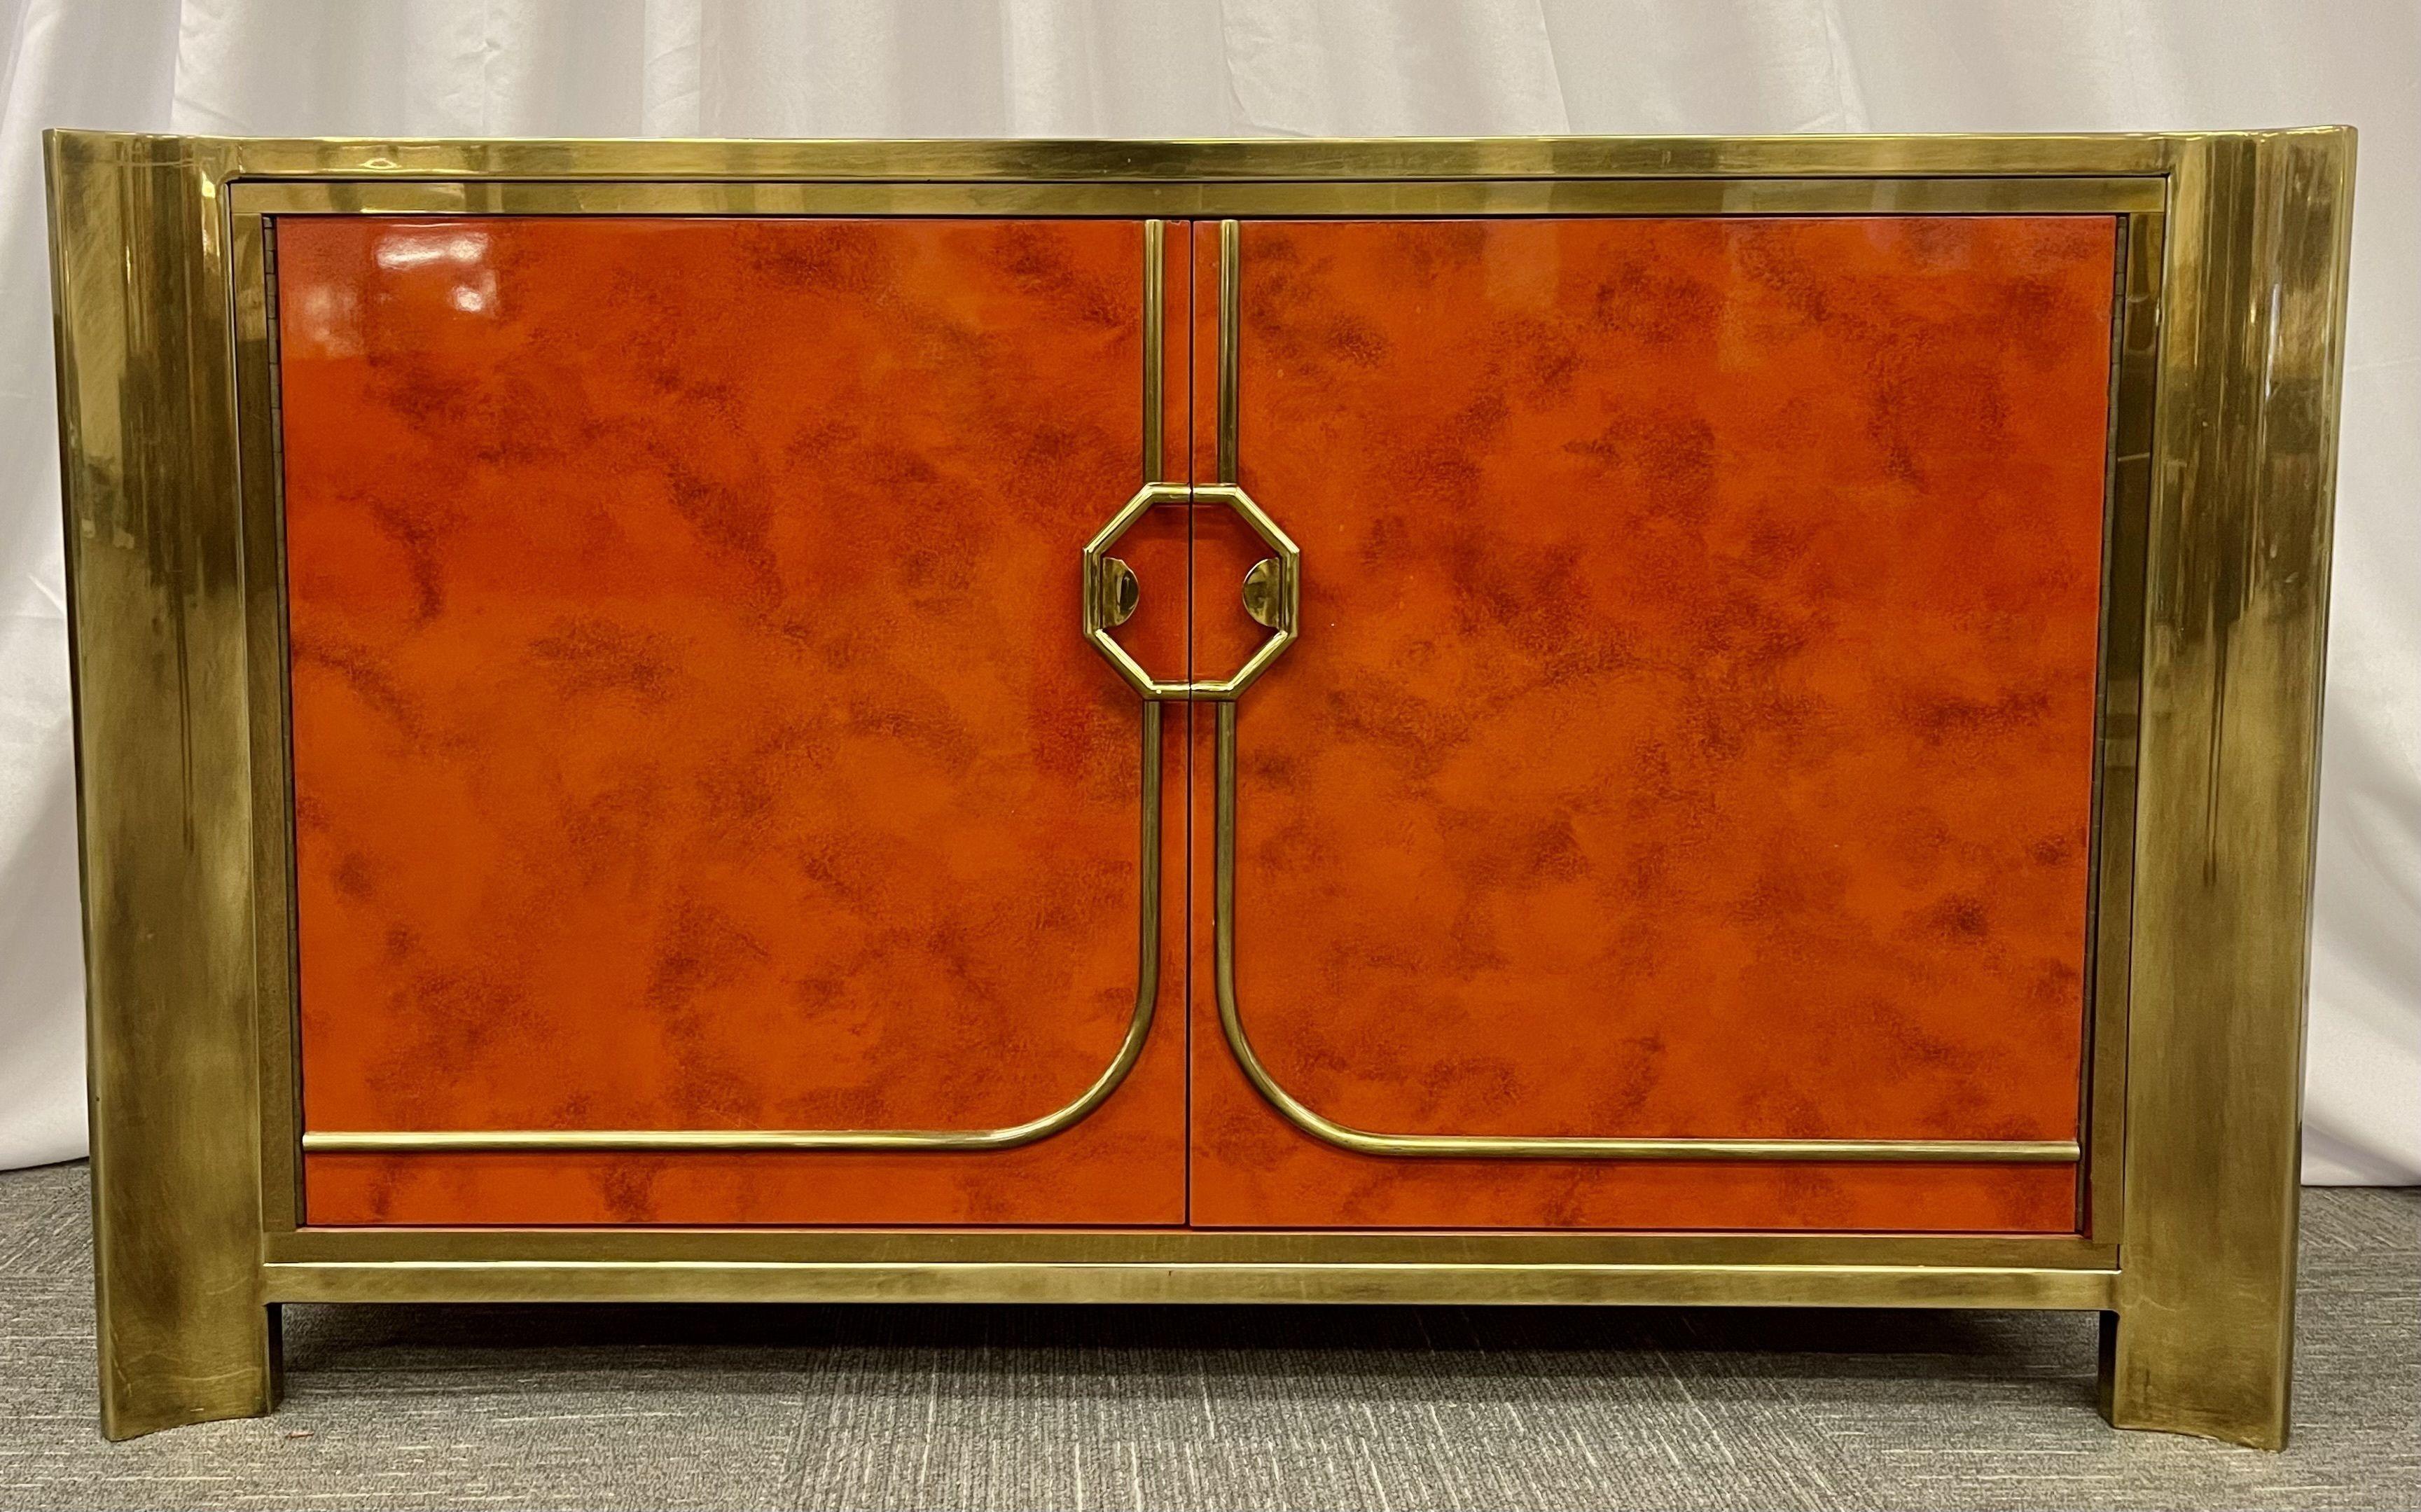 Mastercraft Patinated Brass and Tortoise Shell Style Lacquered Cabinet, Circa 1980s. two large doors and interior having a single adjustable shelf.
Patinated Brass, Lacquer
American, 1980s
Mastercraft: an established American furniture manufacturer